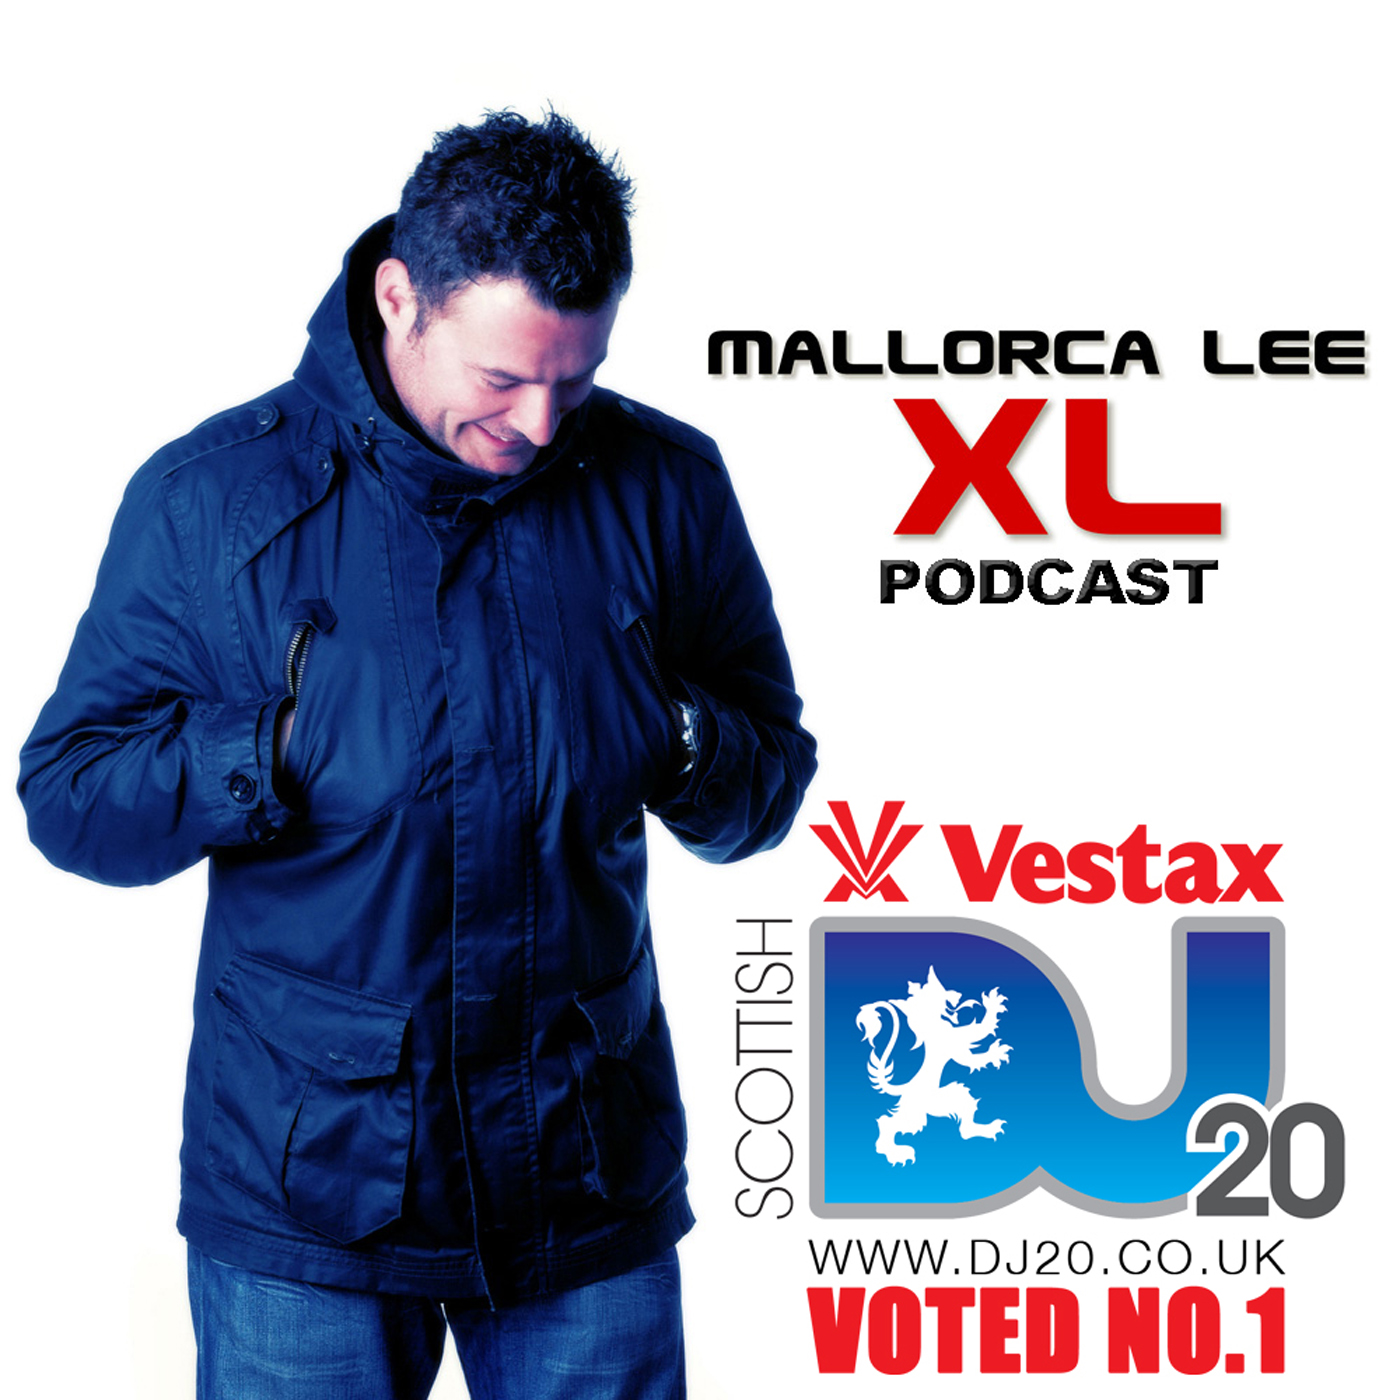 XL Podcast ep. 48 - LIVE FROM THE COLOURS IBIZA REUNION 